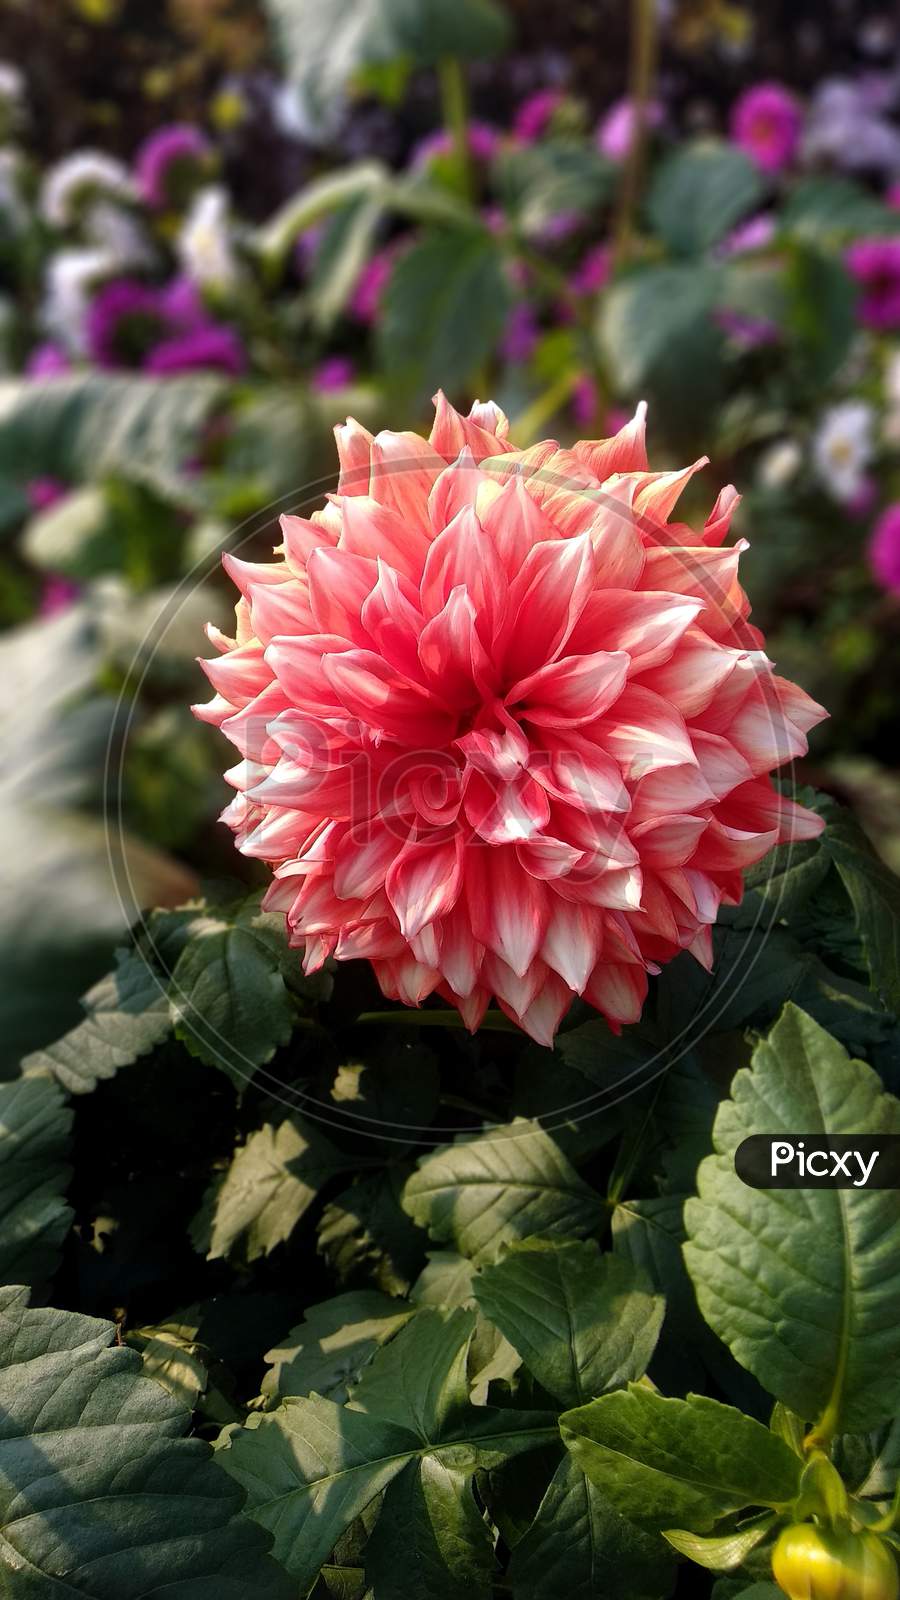 Beautiful Dahlia Flower. A Genus Of Bushy, Tuberous, Herbaceous Perennial Plants Native To Central America. Its Garden Relatives Include The Sunflower, Daisy, Chrysanthemum, And Zinnia.